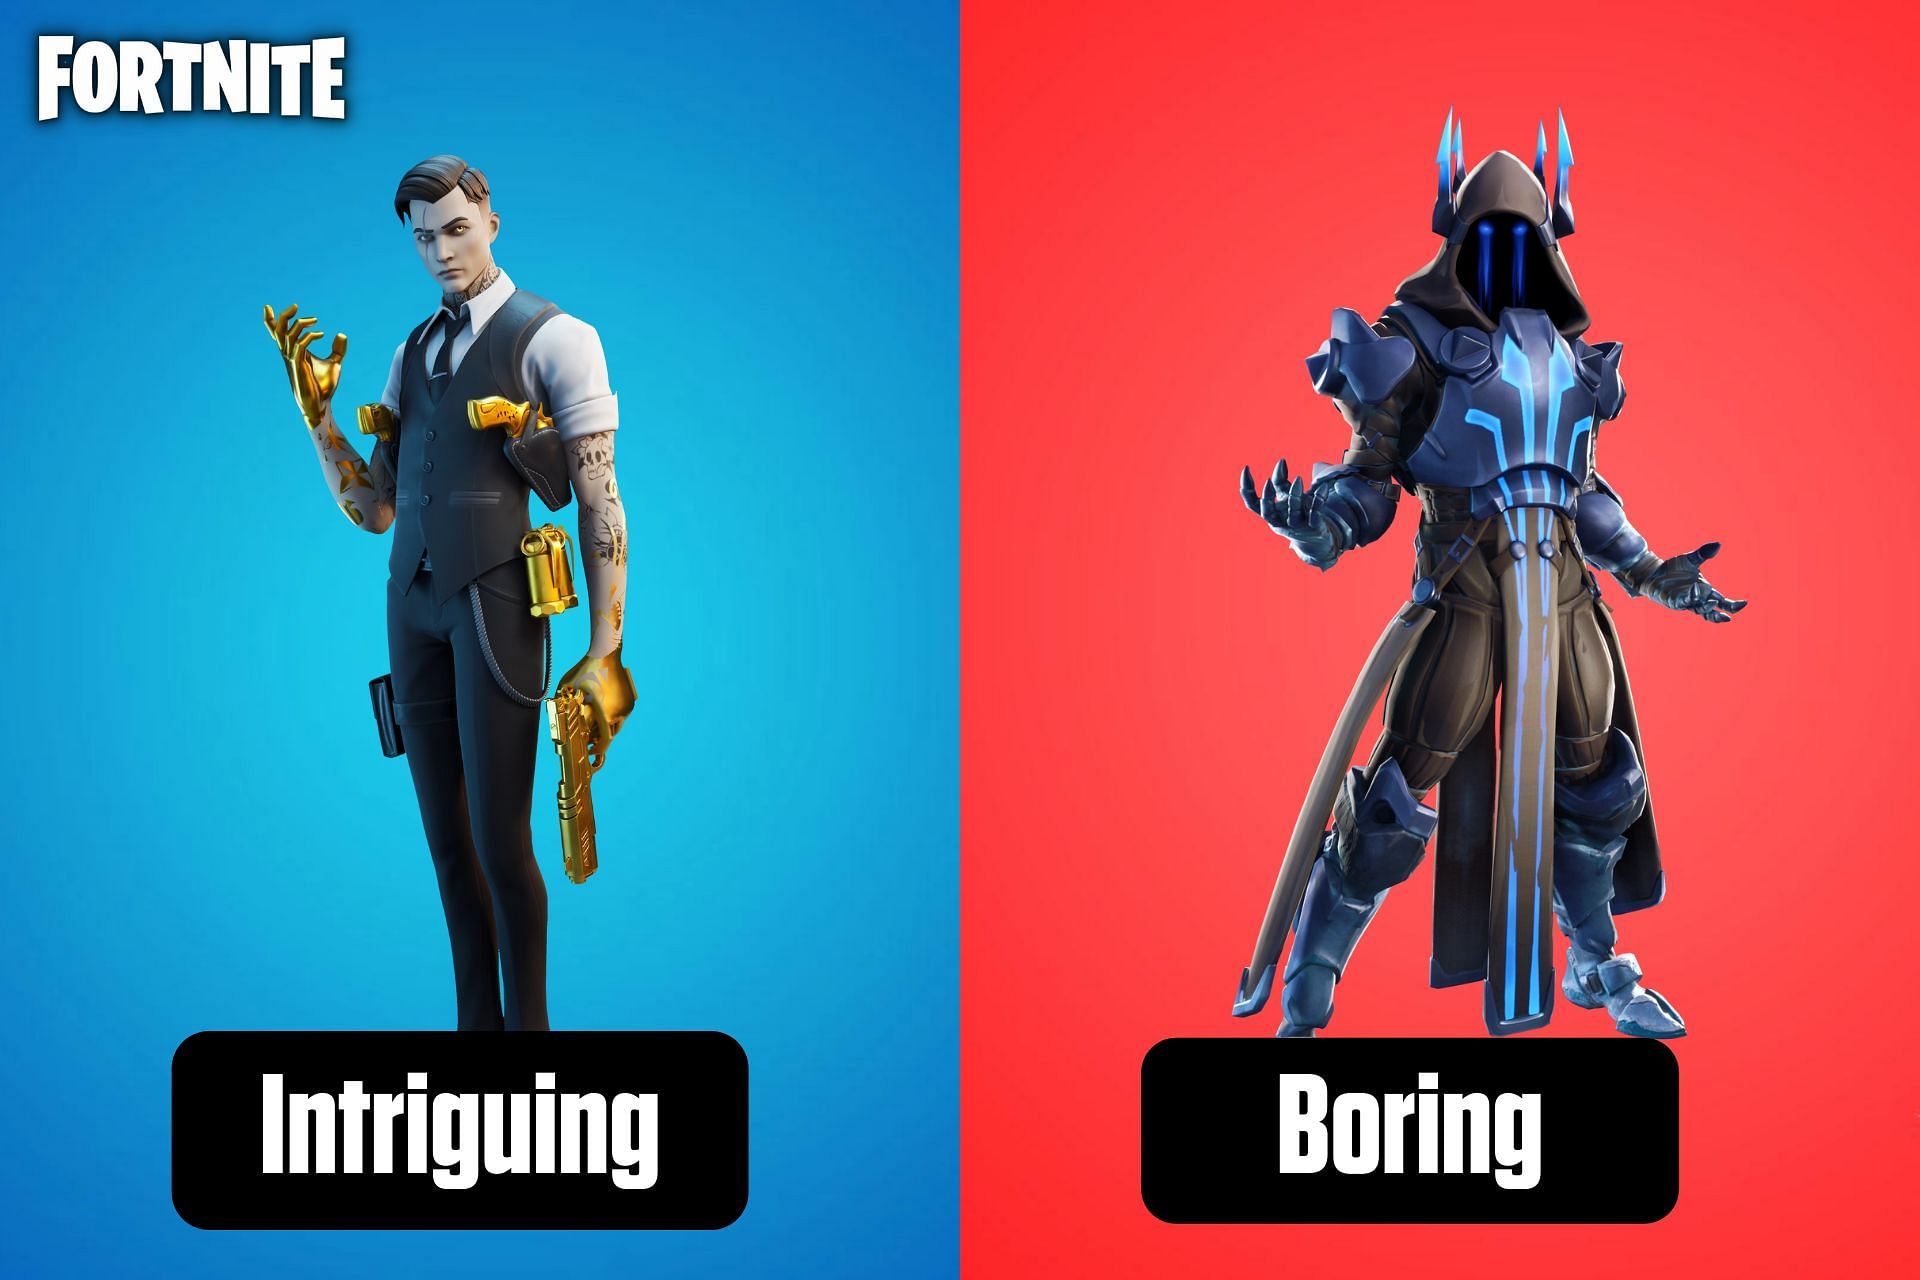 Some Fortnite characters are soon forgotten, while others become legends (Image via Sportskeeda)